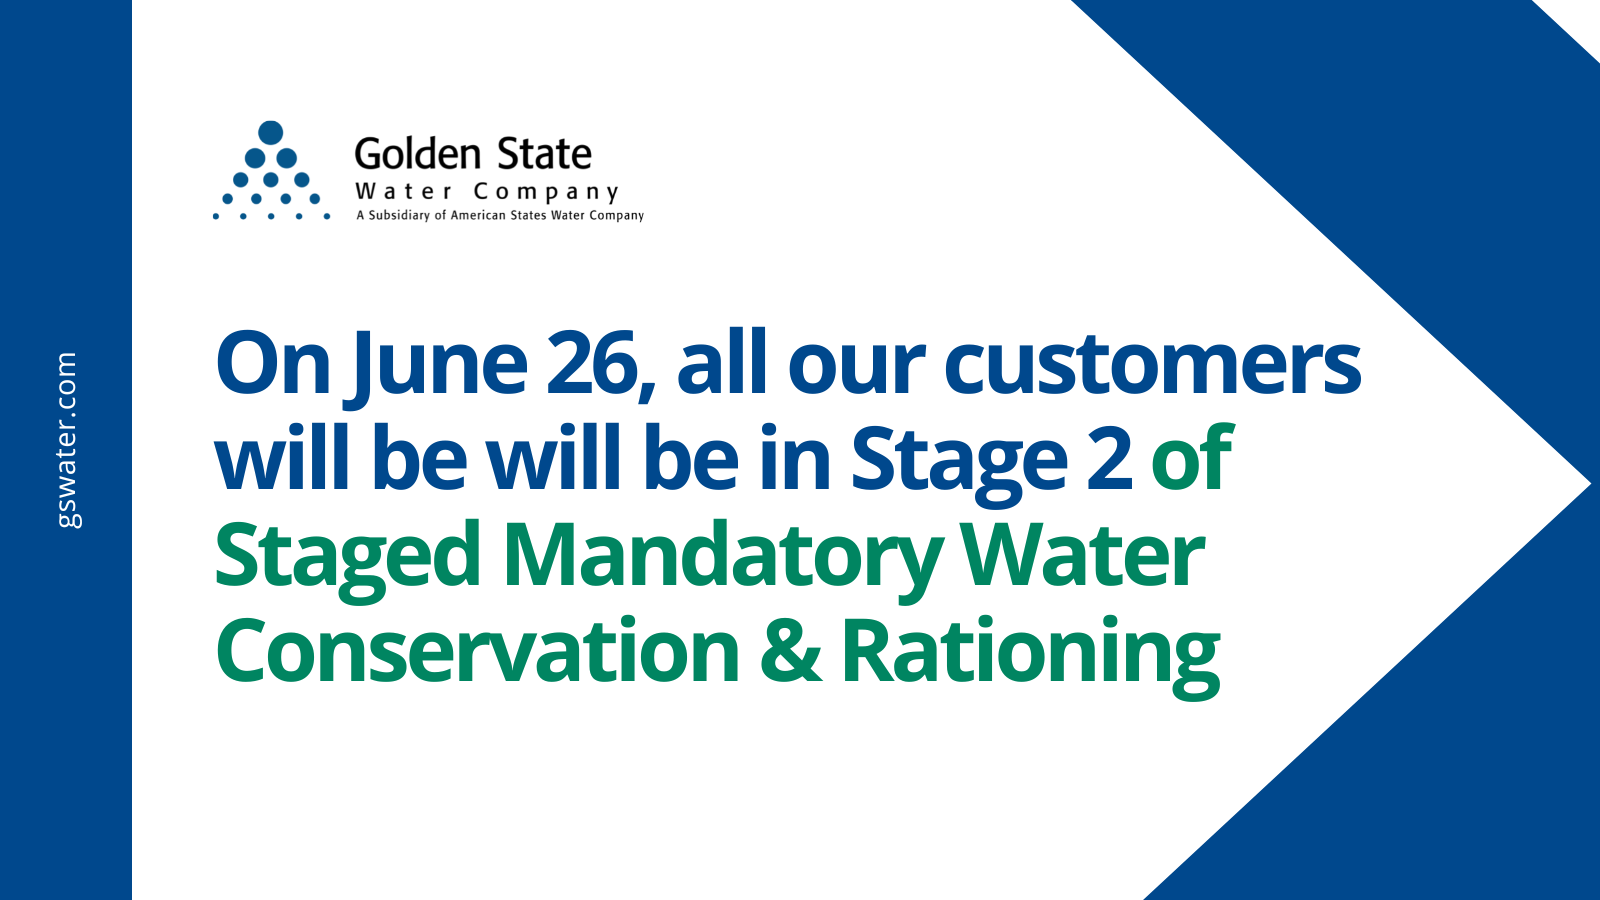 golden-state-water-company-water-conservation-update-city-of-culver